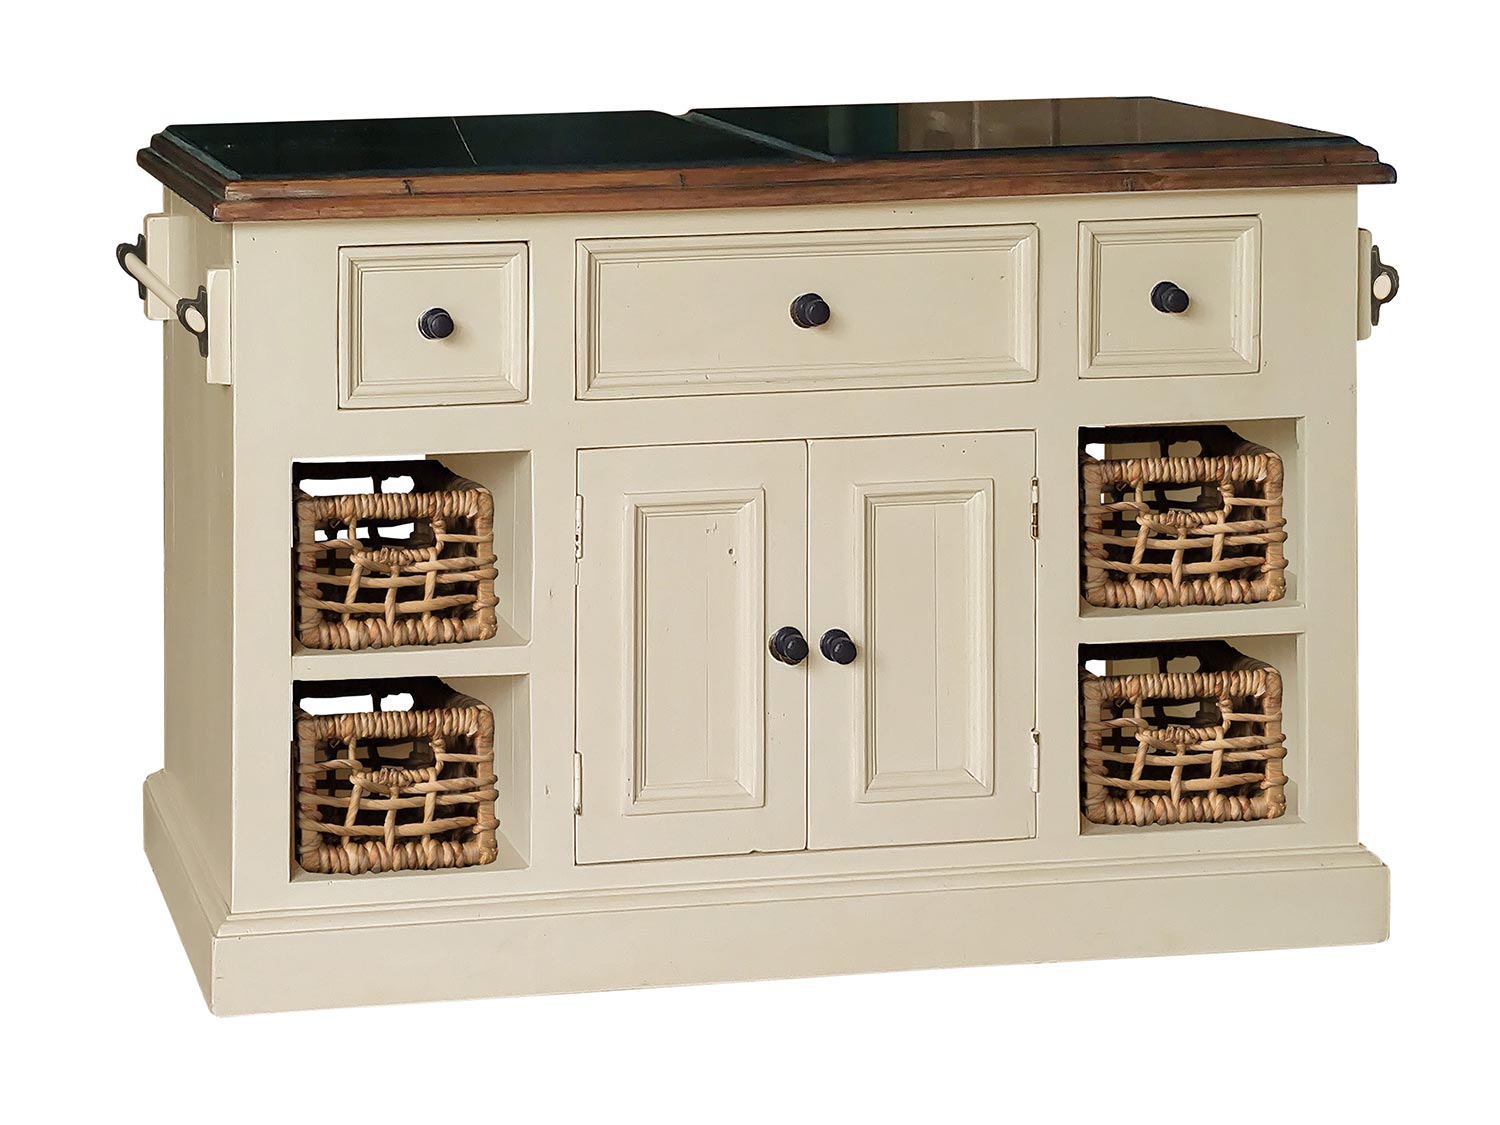 Hillsdale Tuscan Retreat Large Granite Top Kitchen Island with 2 Baskets - Country White